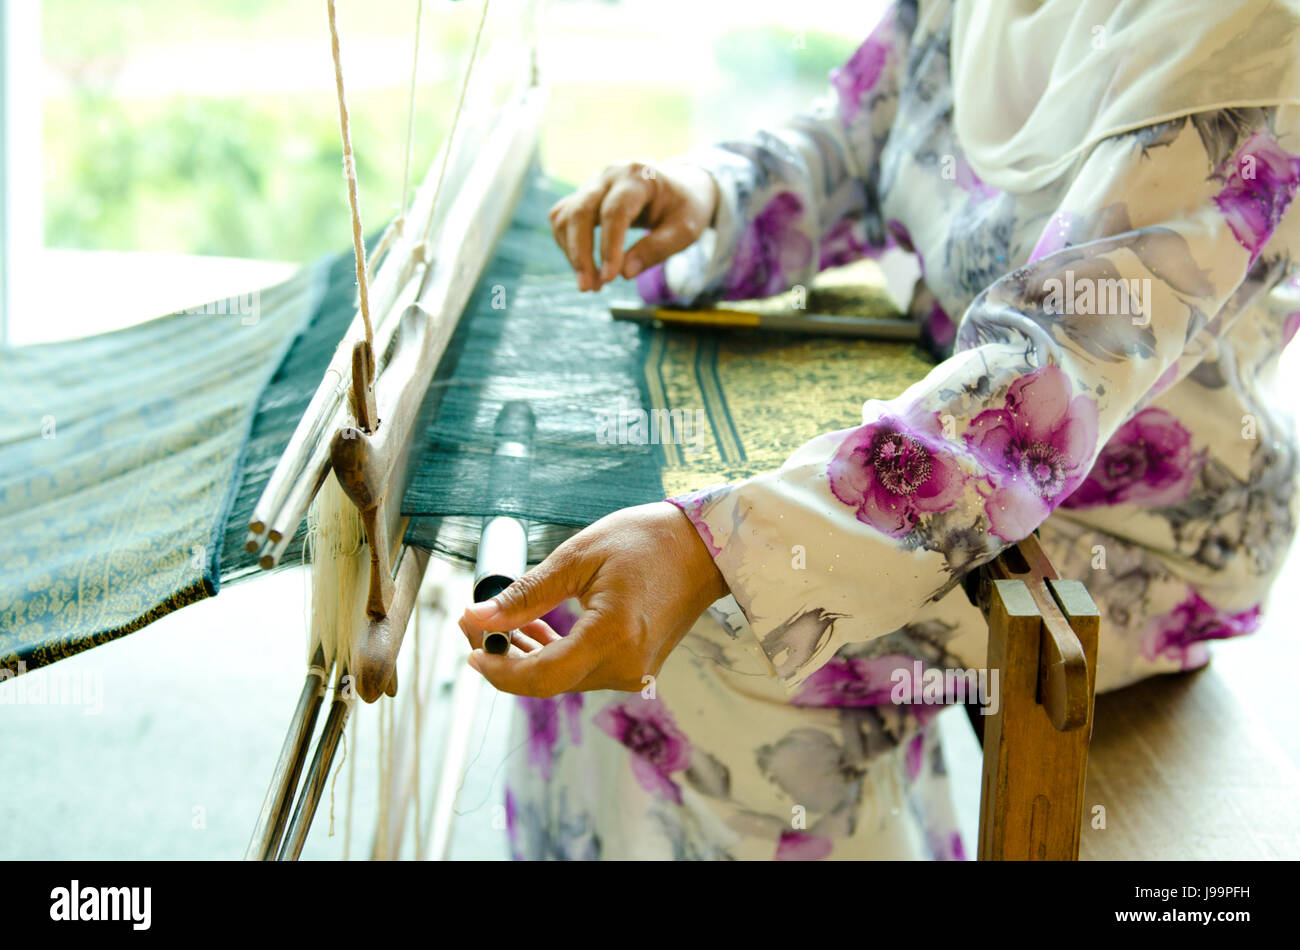 woman, women, tool, art, culture, colour, female, industry, asia, indonesia, Stock Photo